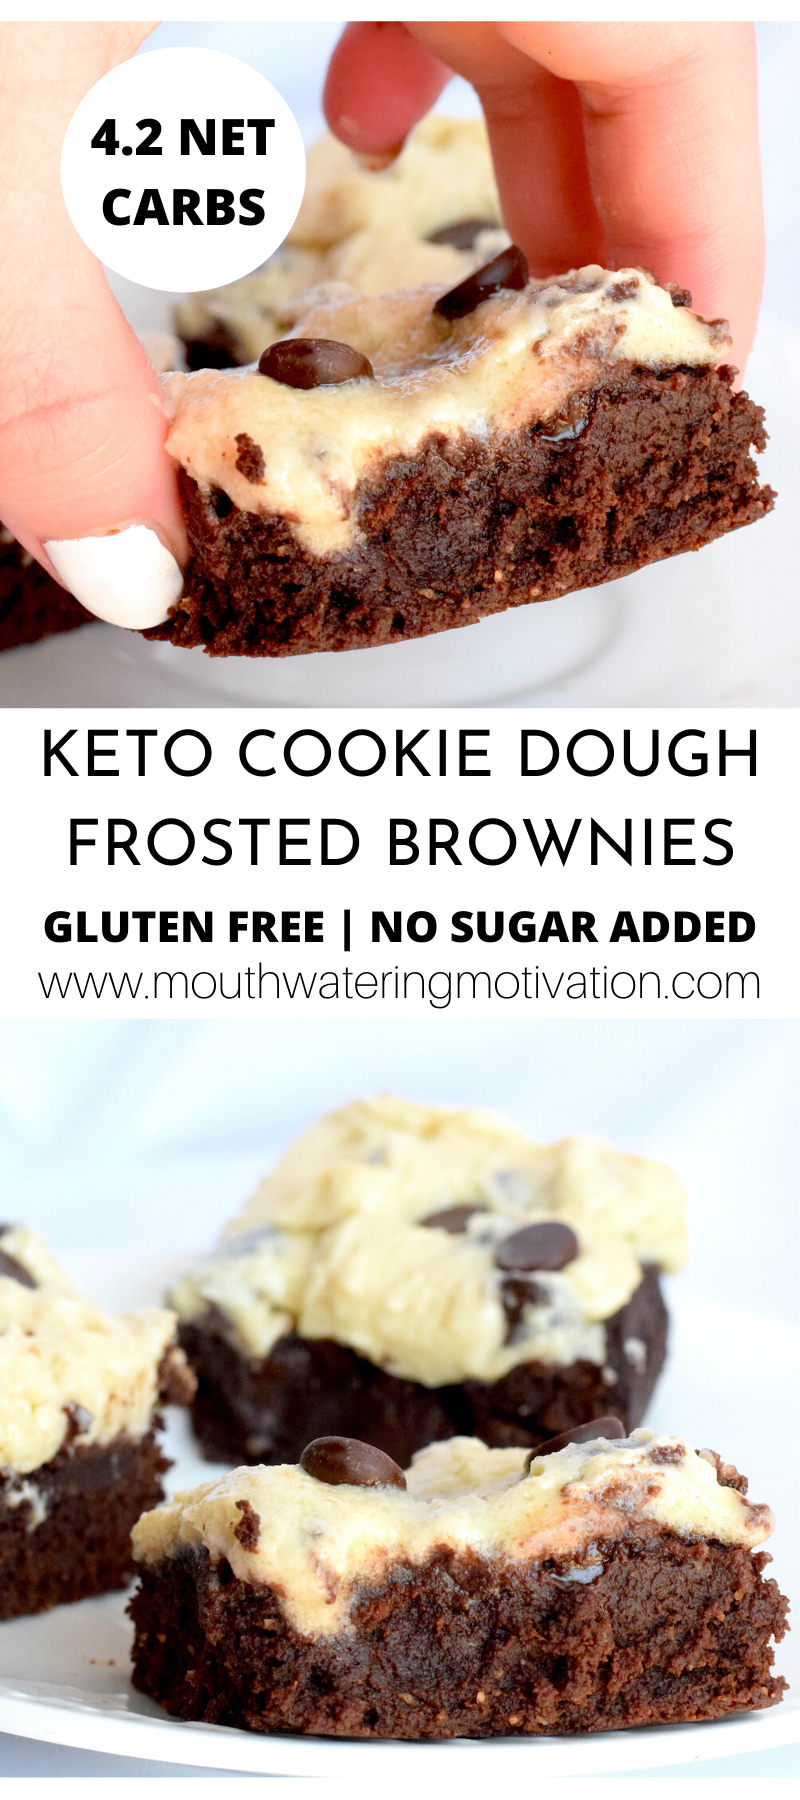 KETO COOKIE DOUGH FROSTED BROWNIES